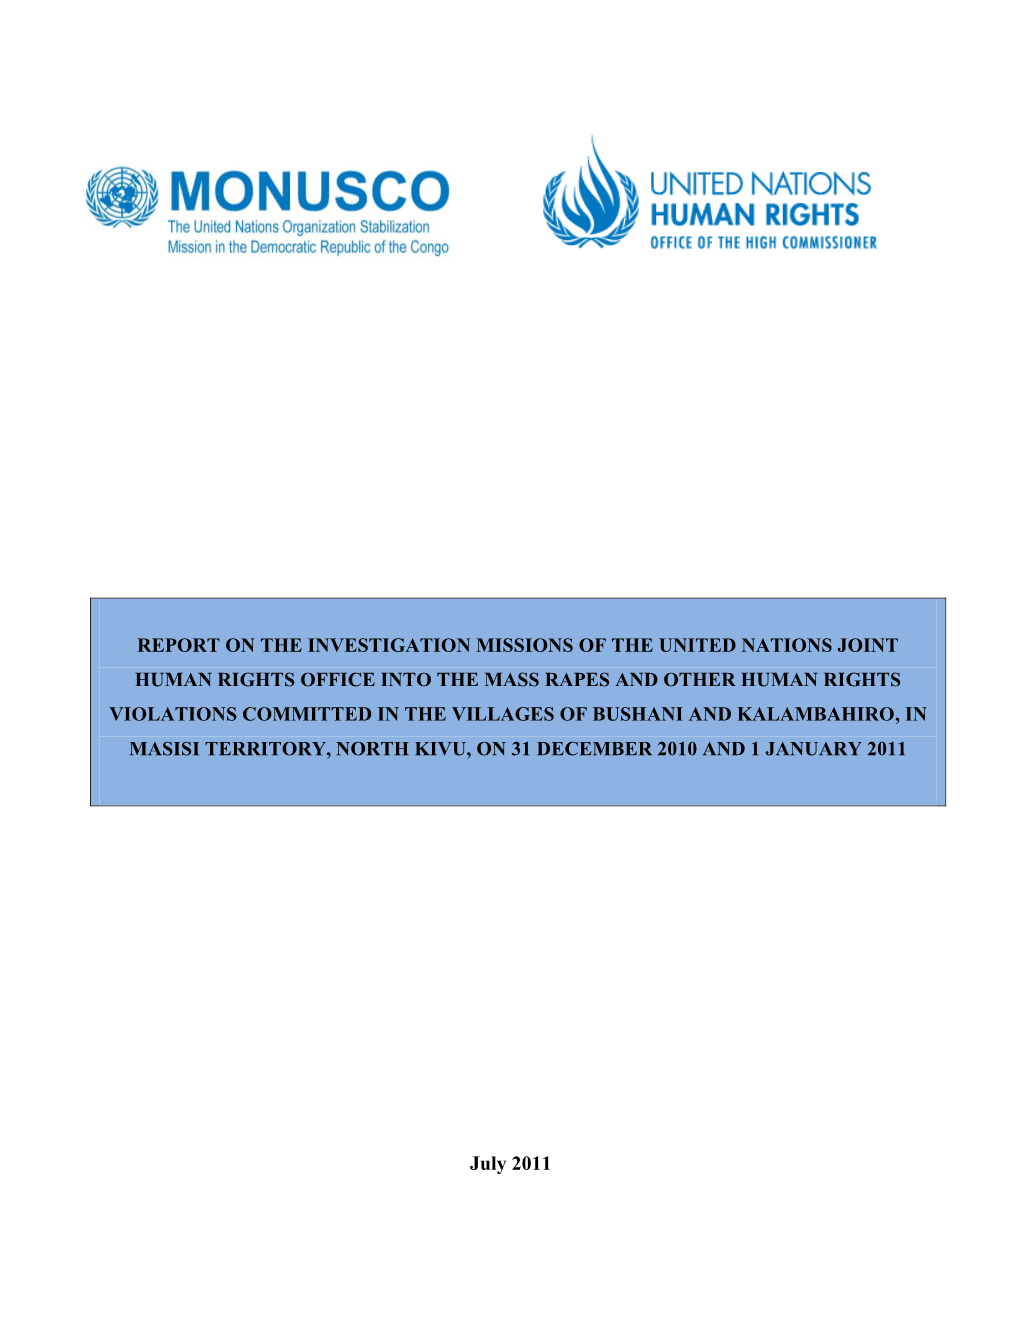 Report on the Investigation Missions of the United Nations Joint